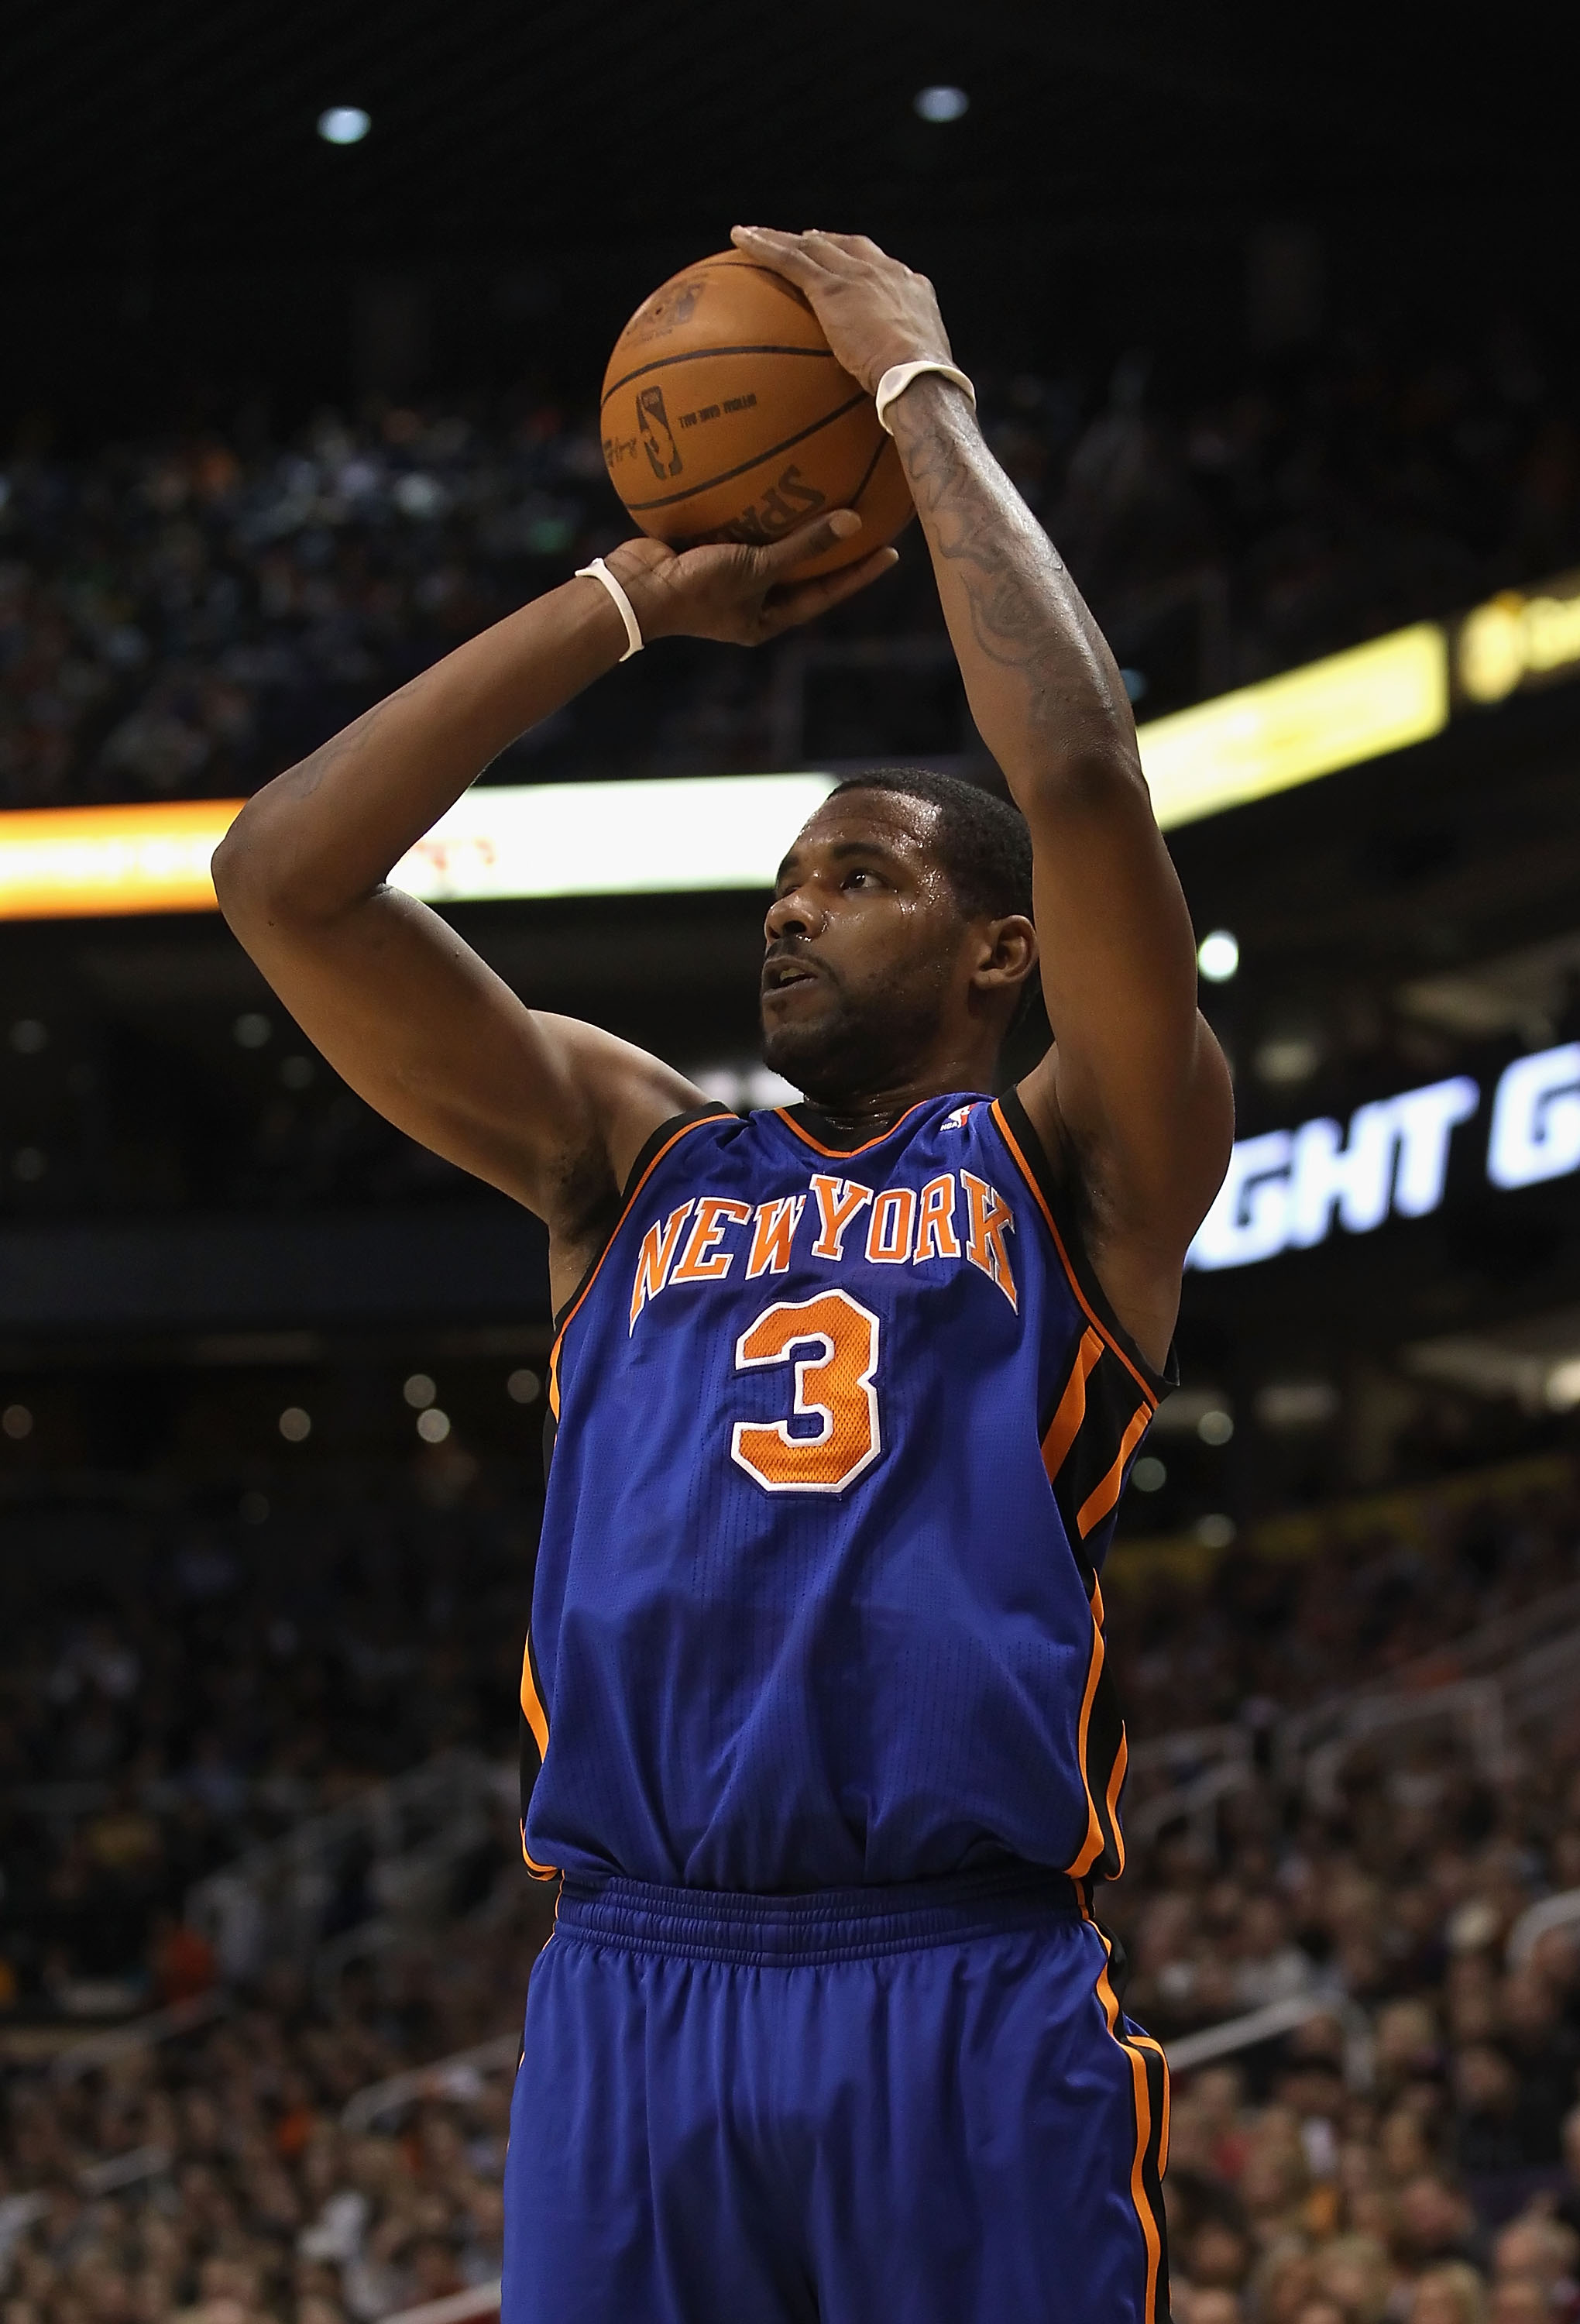 PHOENIX, AZ - JANUARY 07:  Shawne Williams #3 of the New York Knicks puts up a shot against the Phoenix Suns during the NBA game at US Airways Center on January 7, 2011 in Phoenix, Arizona.  The Knicks defeated the Suns 121-96.  NOTE TO USER: User express